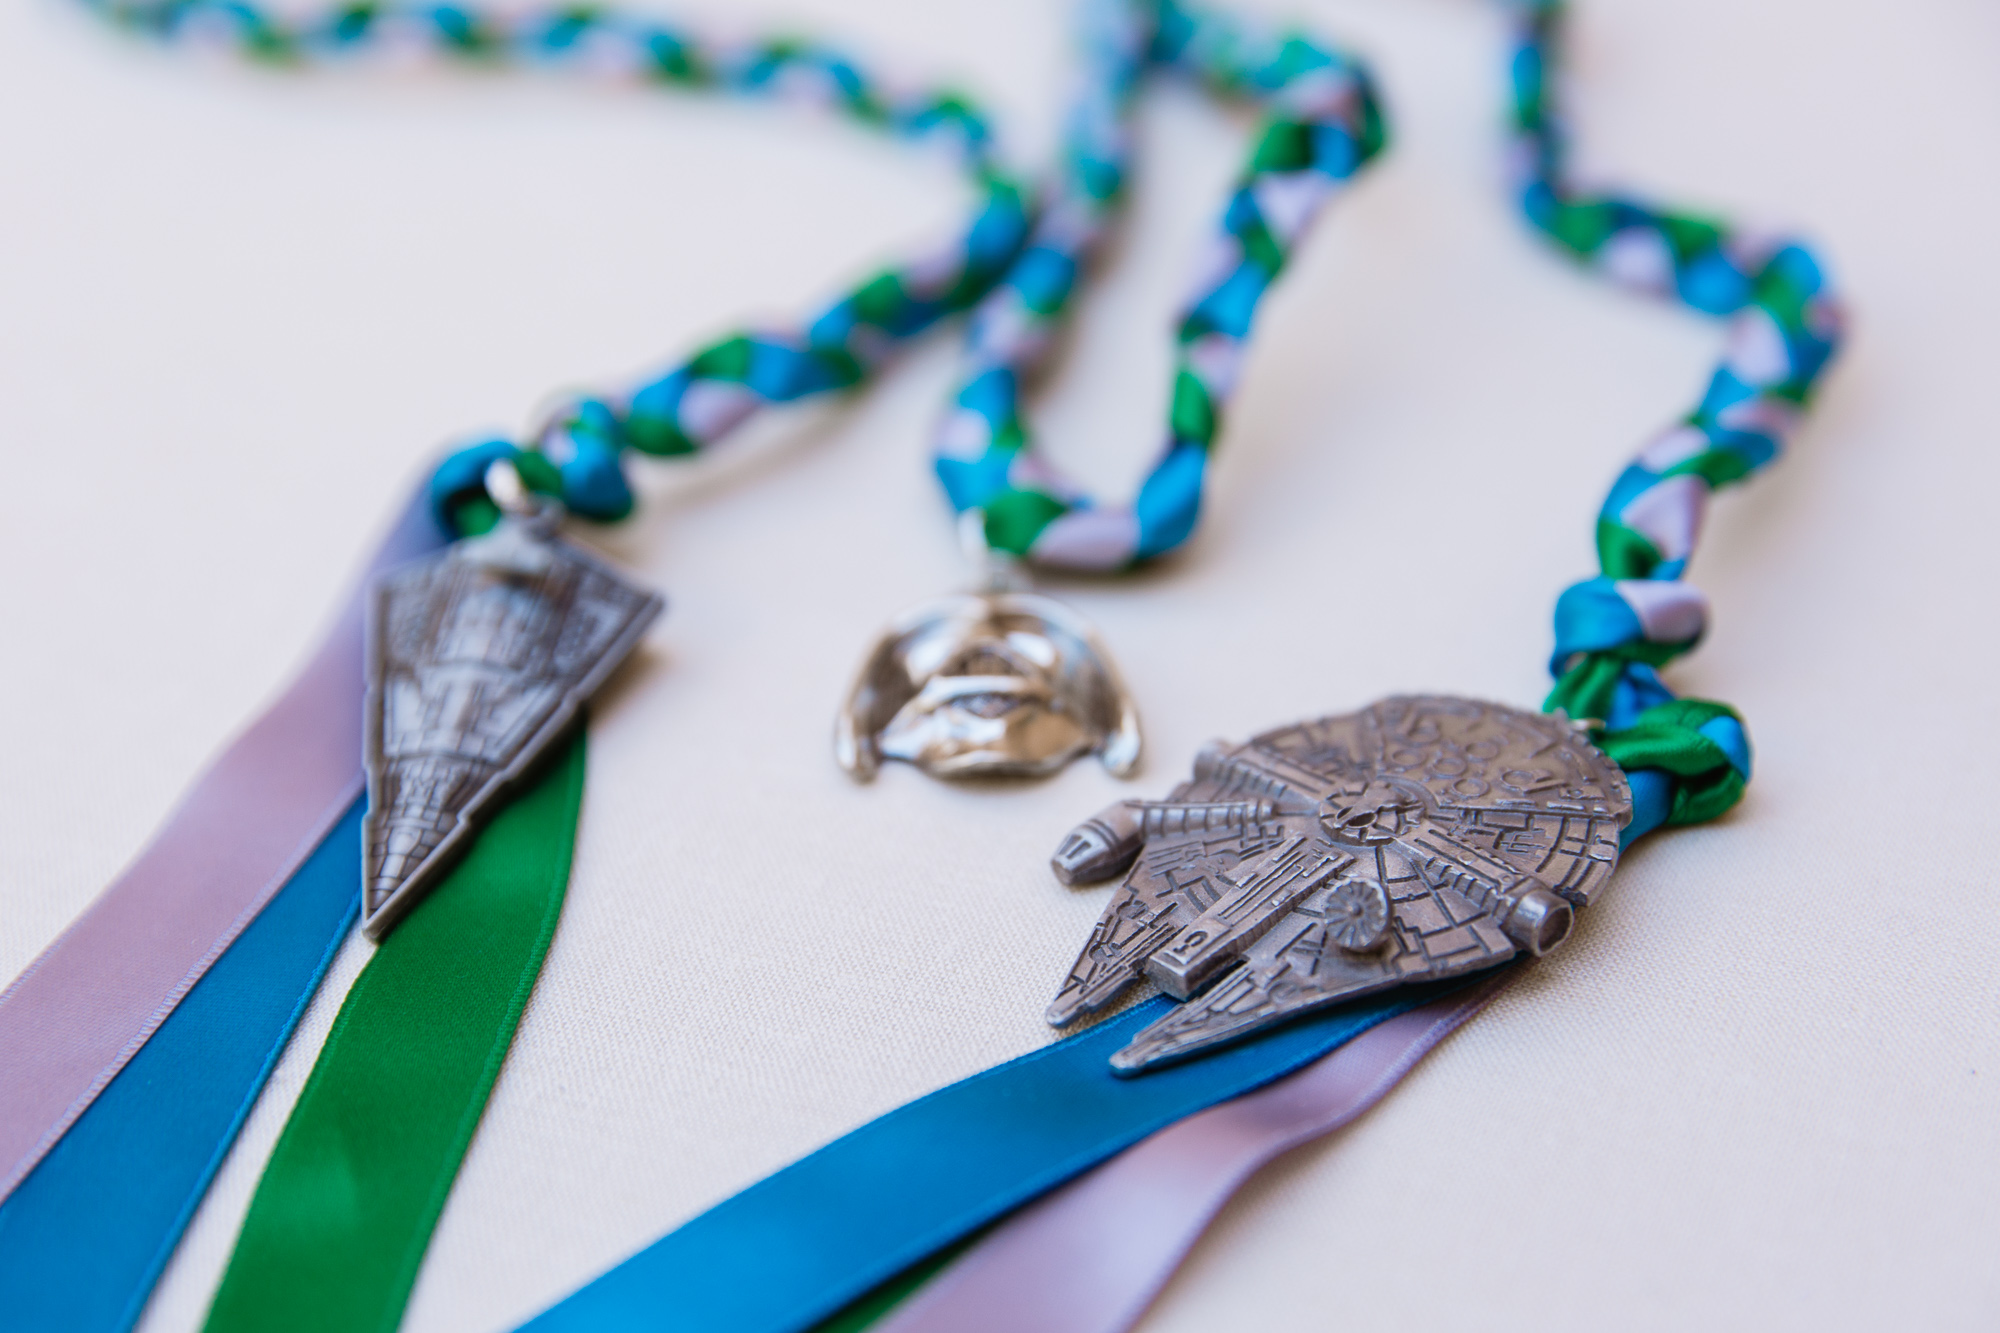 Star Wars charms on blue green and grey handfasting chords by Phoenix wedding photographer PMA Photography.